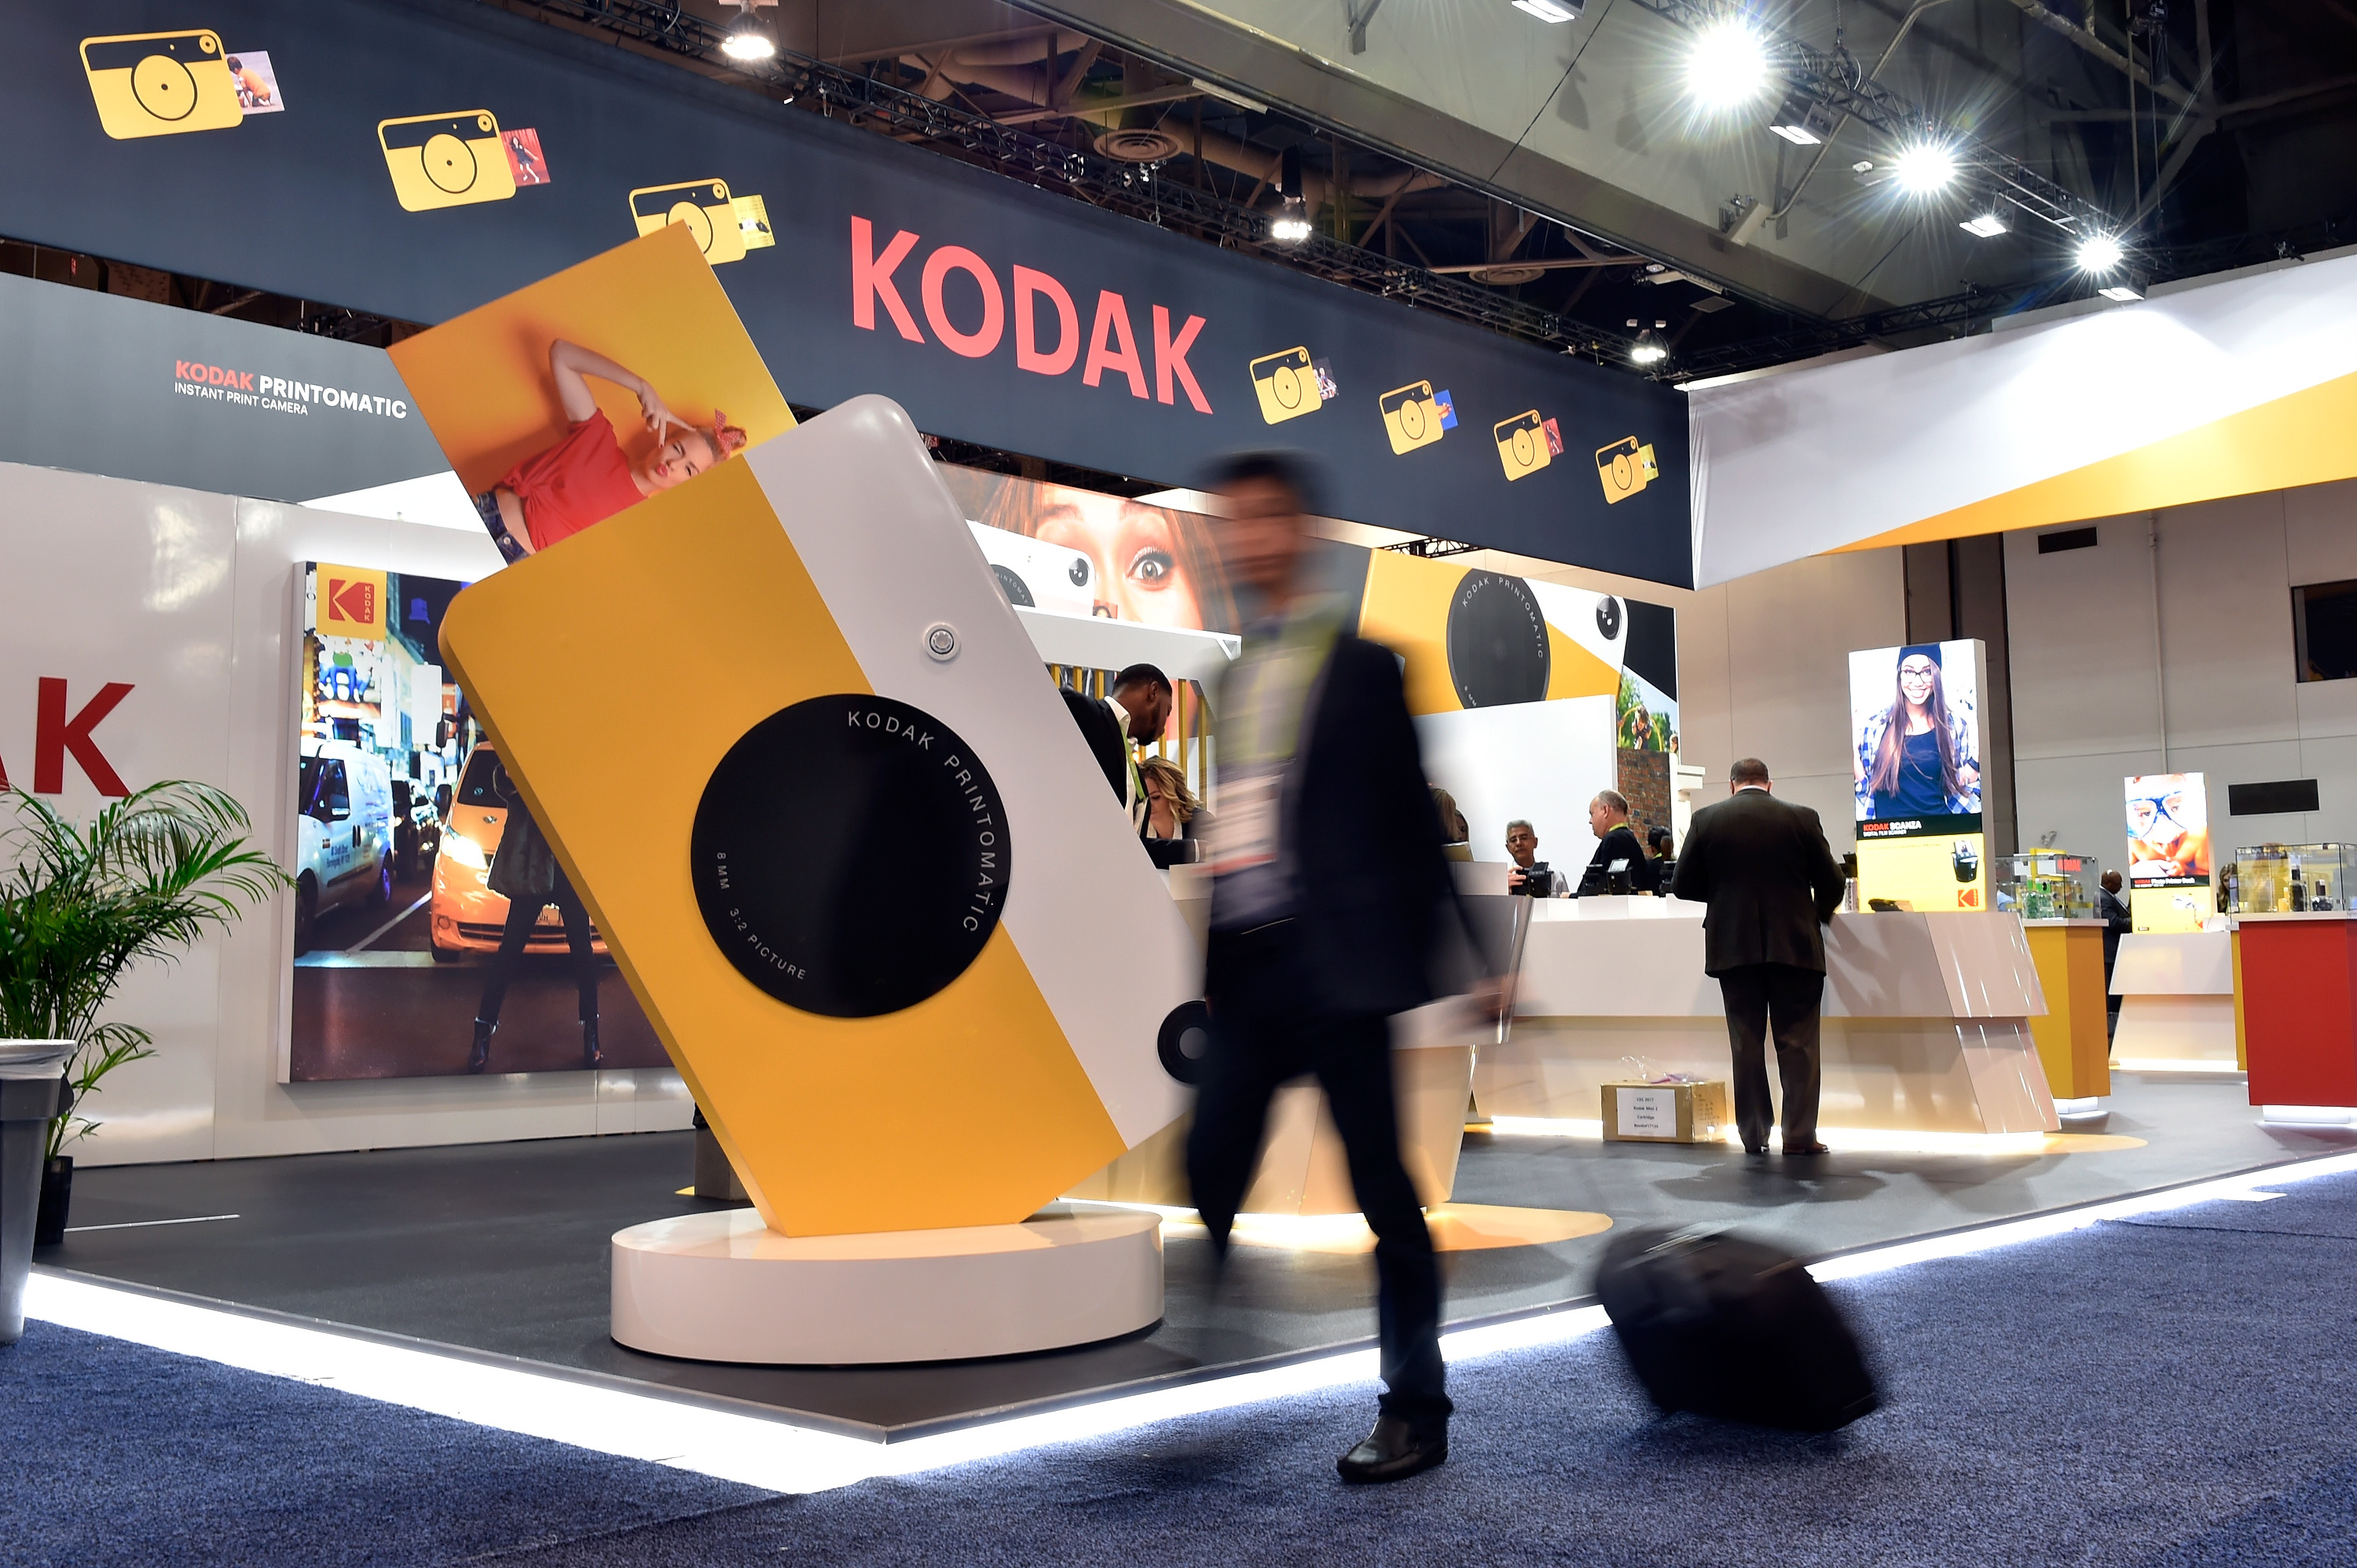 An attendee walks by the Kodak booth during CES 2018 at the Las Vegas Convention Center. CES is the world's largest annual consumer technology trade show. (Photo by David Becker/Getty Images)